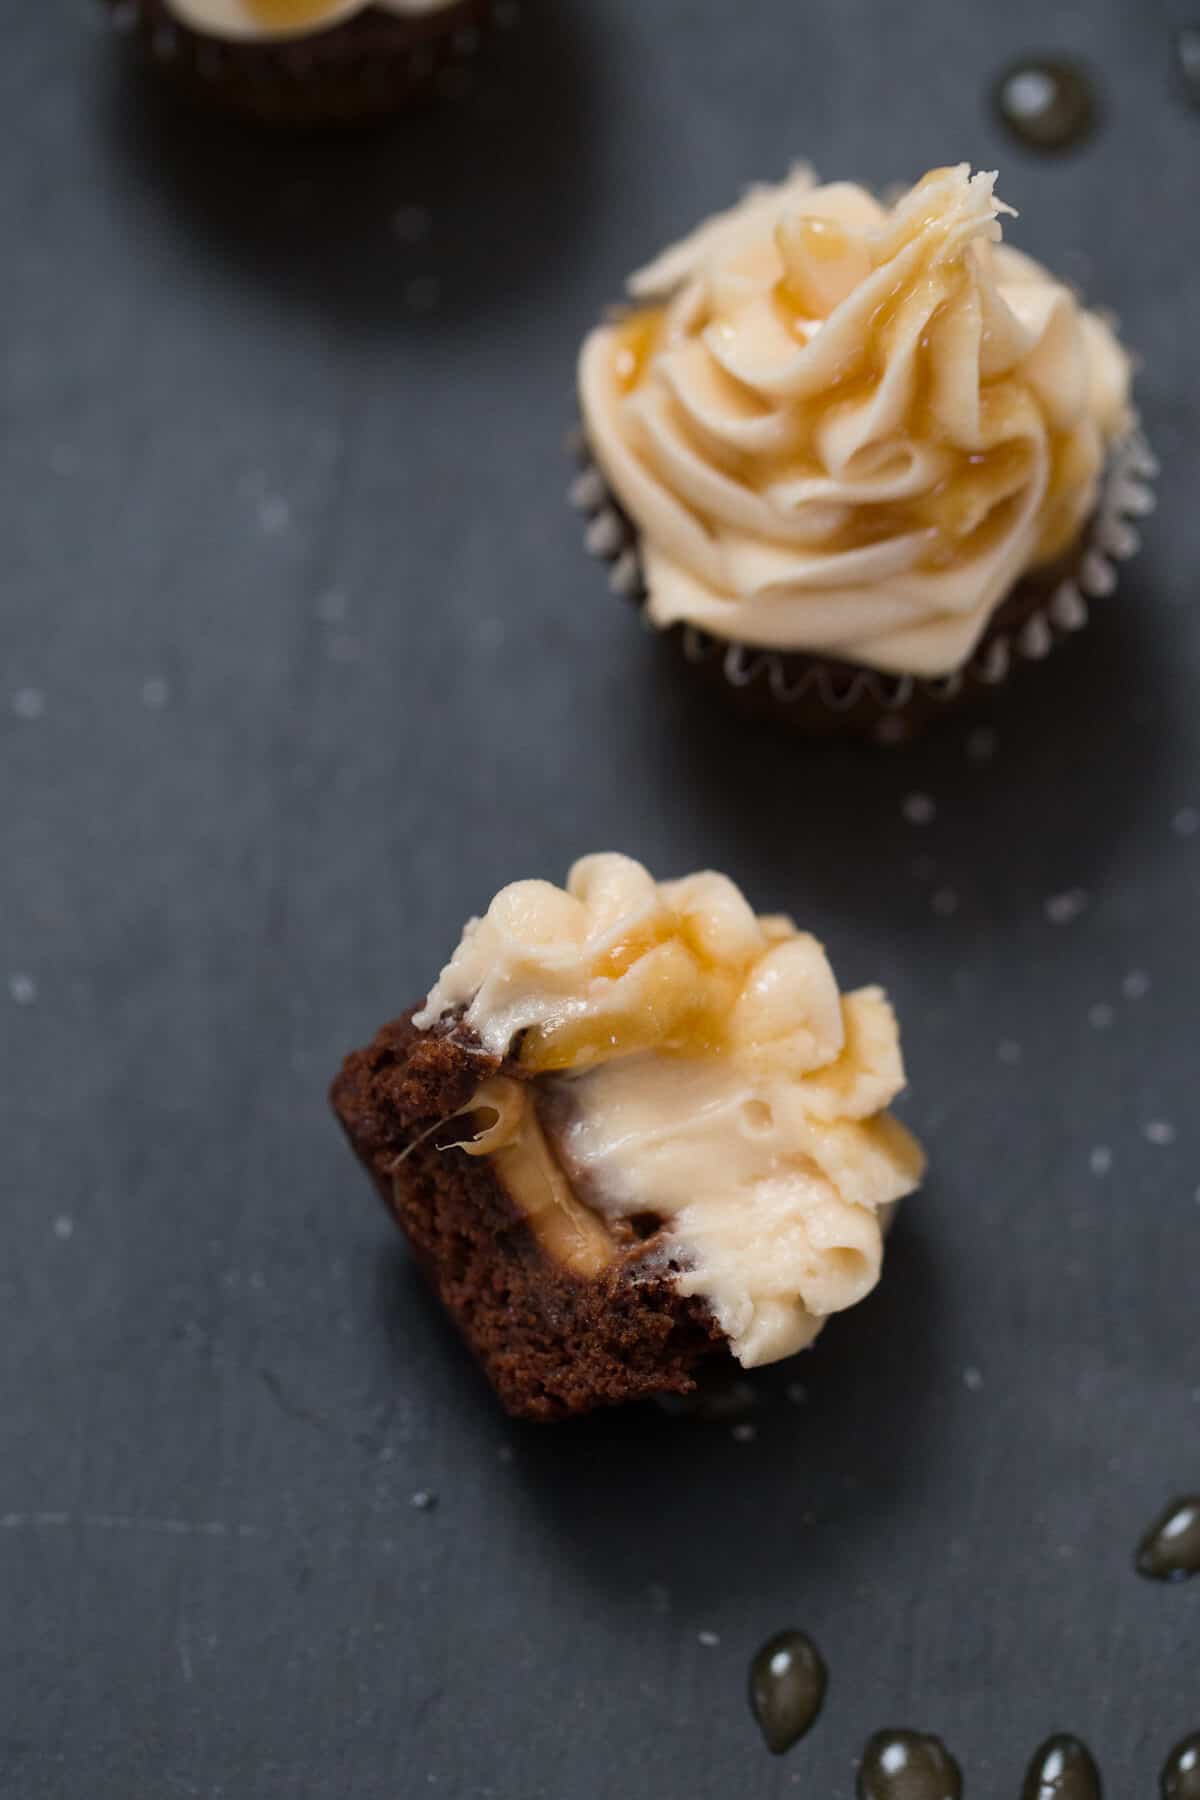 Bailey's Salted Caramel Brownies are crave-worthy two bite treats! Set yourself a few because the chocolate brownies are going to go quickly!